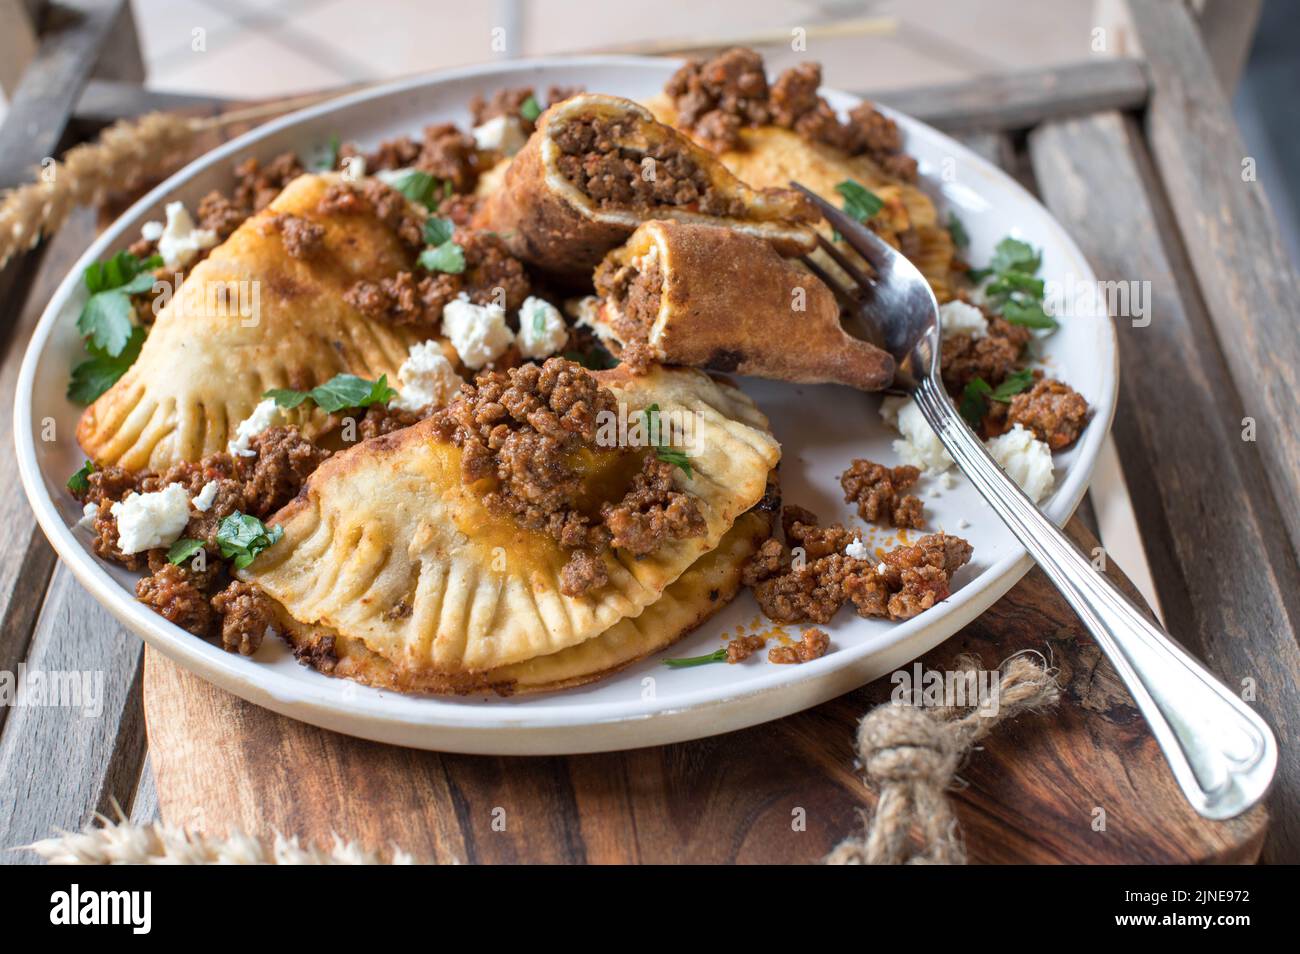 Pierogi, russian dumplings filled with spicy ground beef and feta cheese. Stock Photo